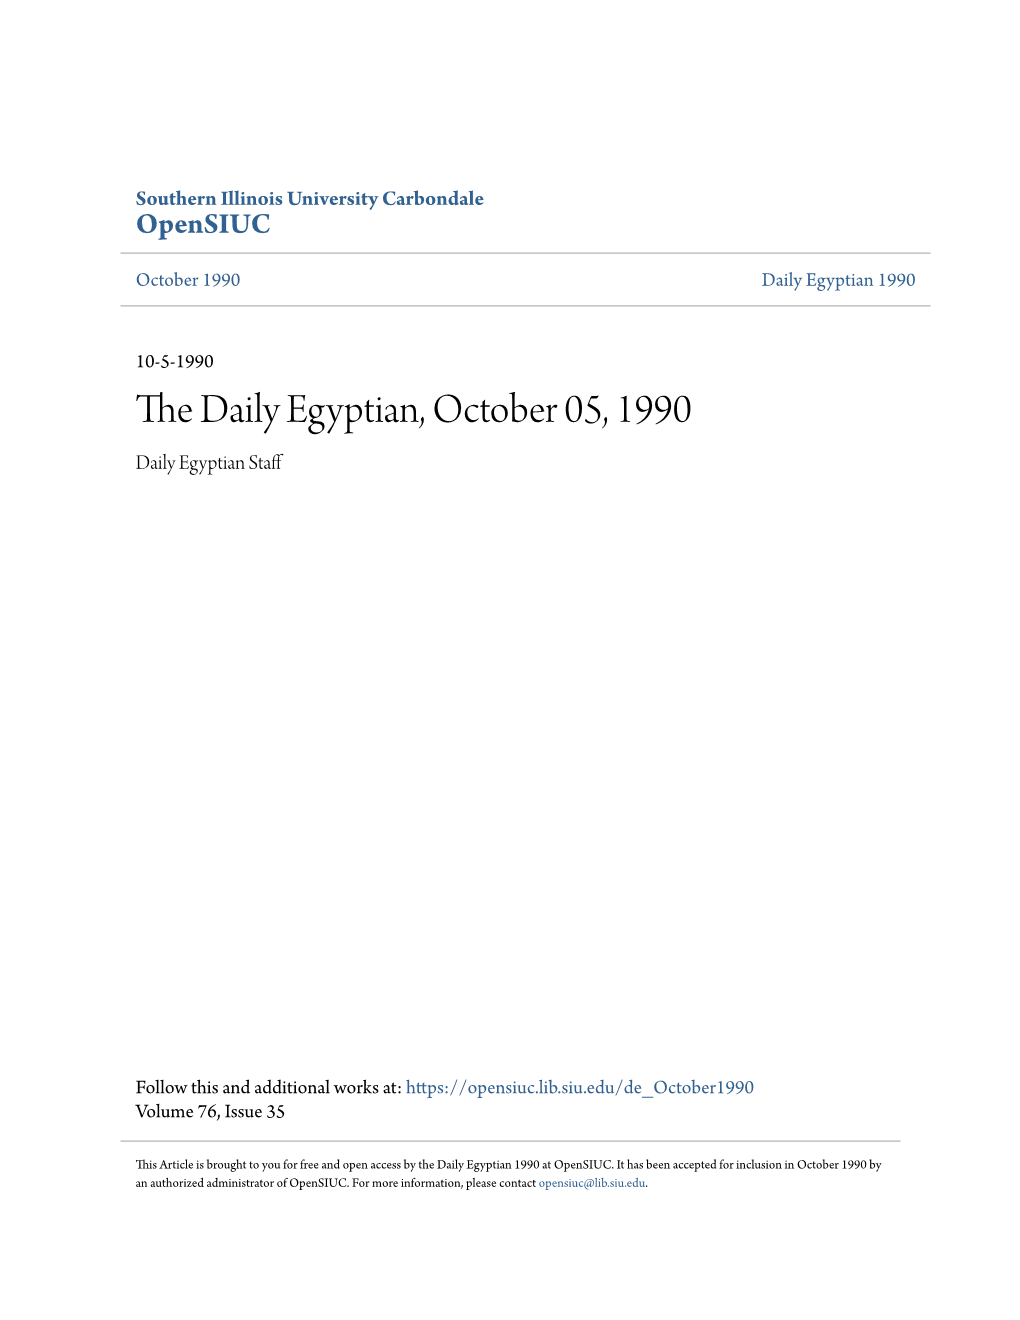 The Daily Egyptian, October 05, 1990